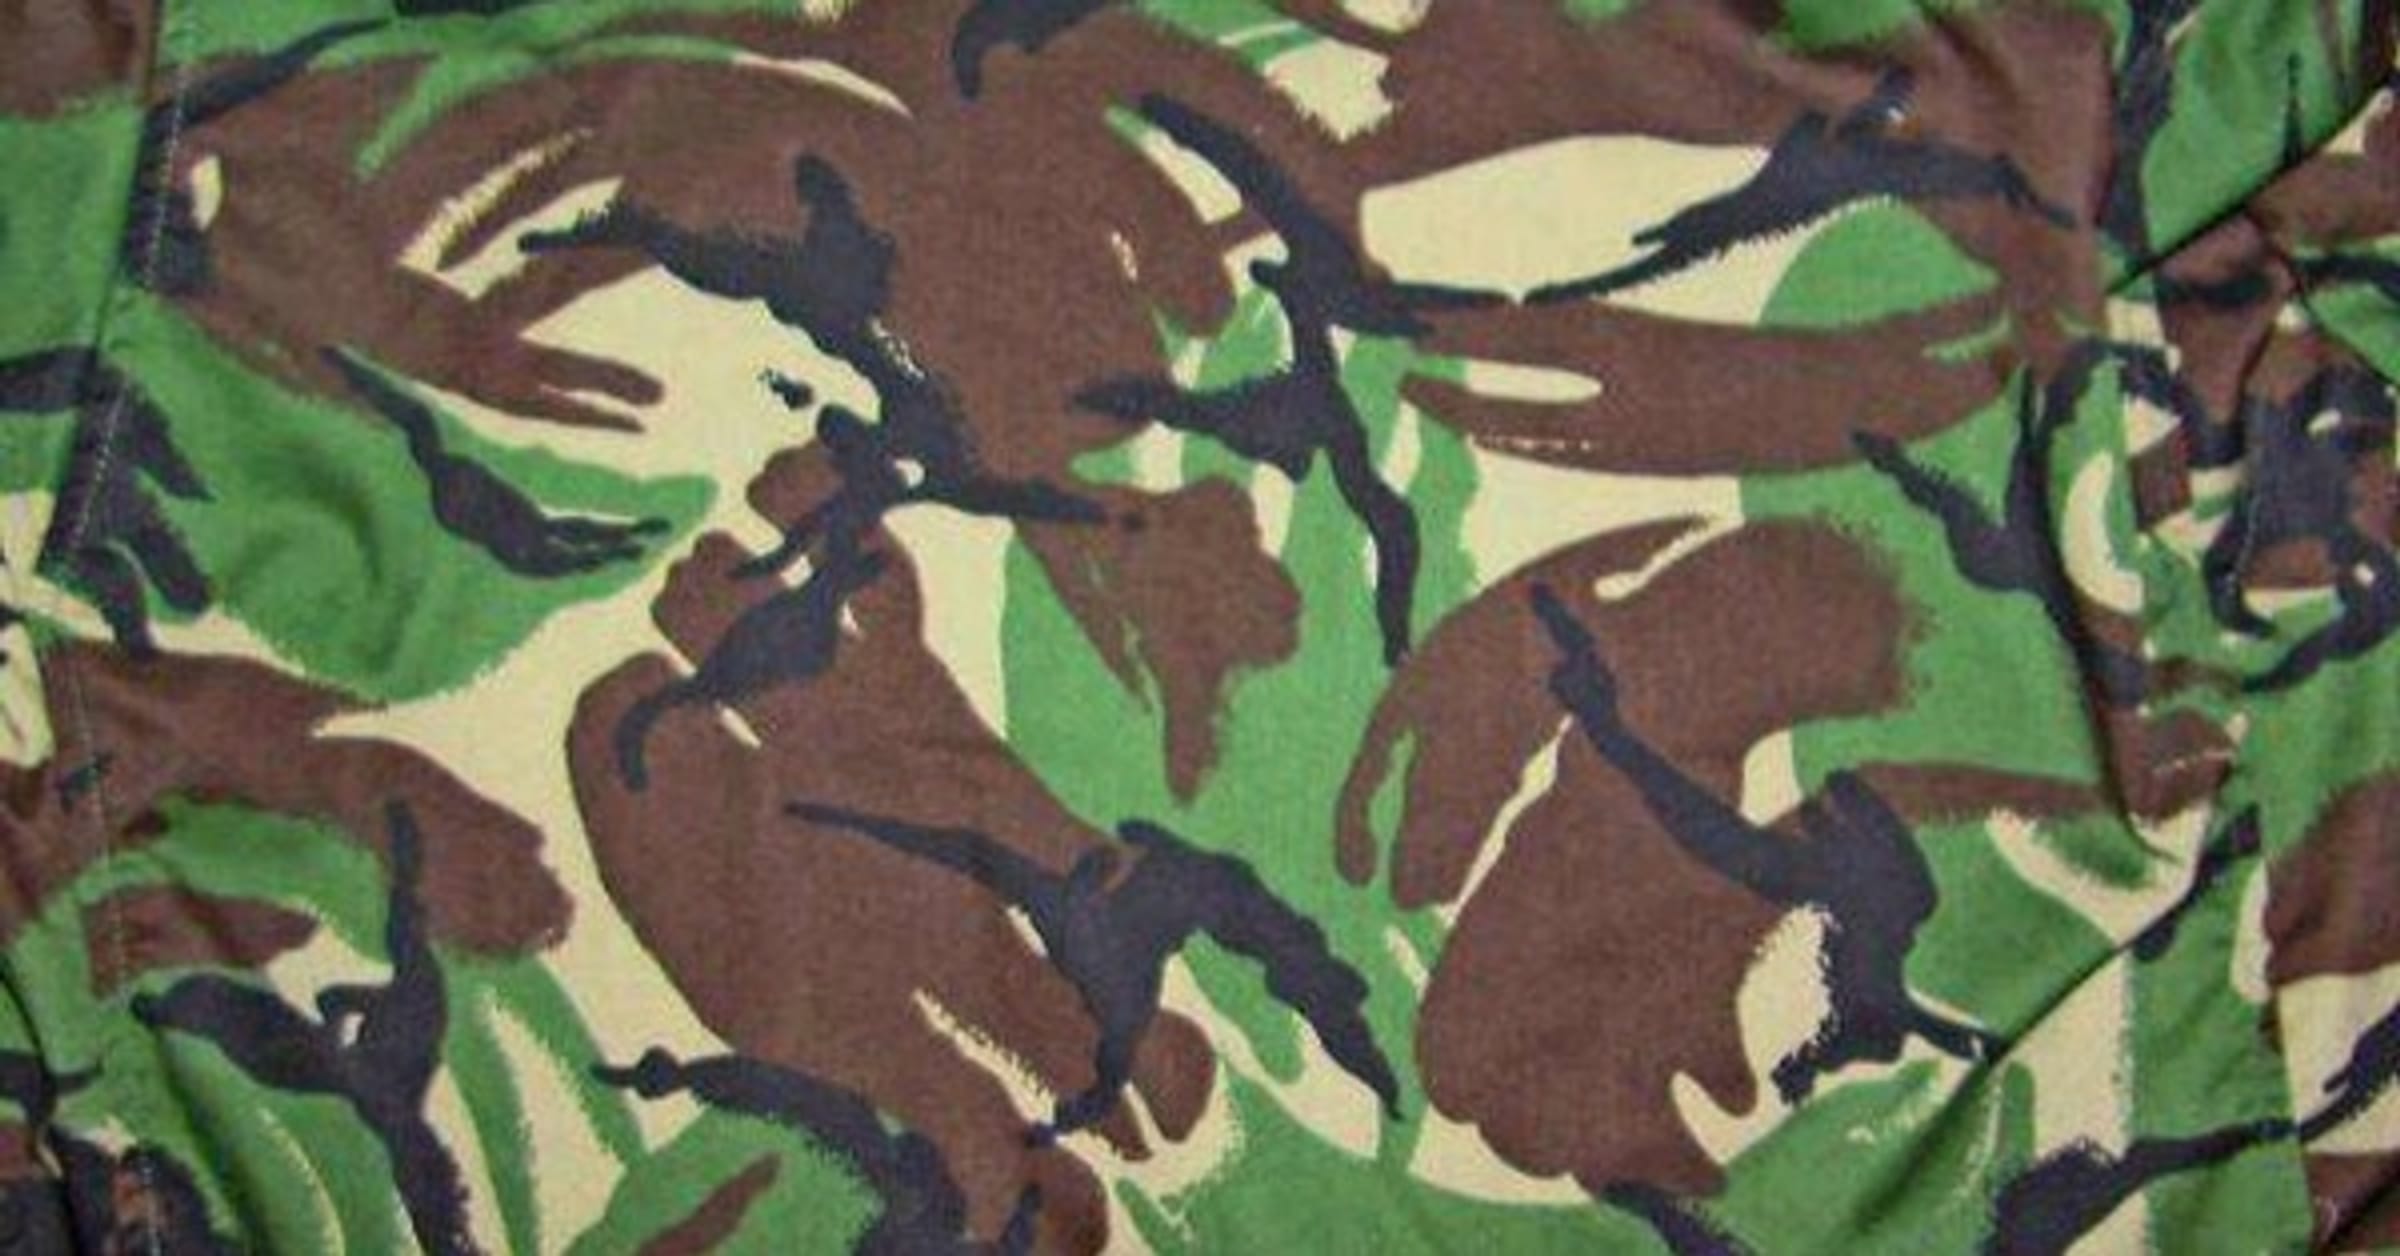 CAMO, GREEN traditional camouflage